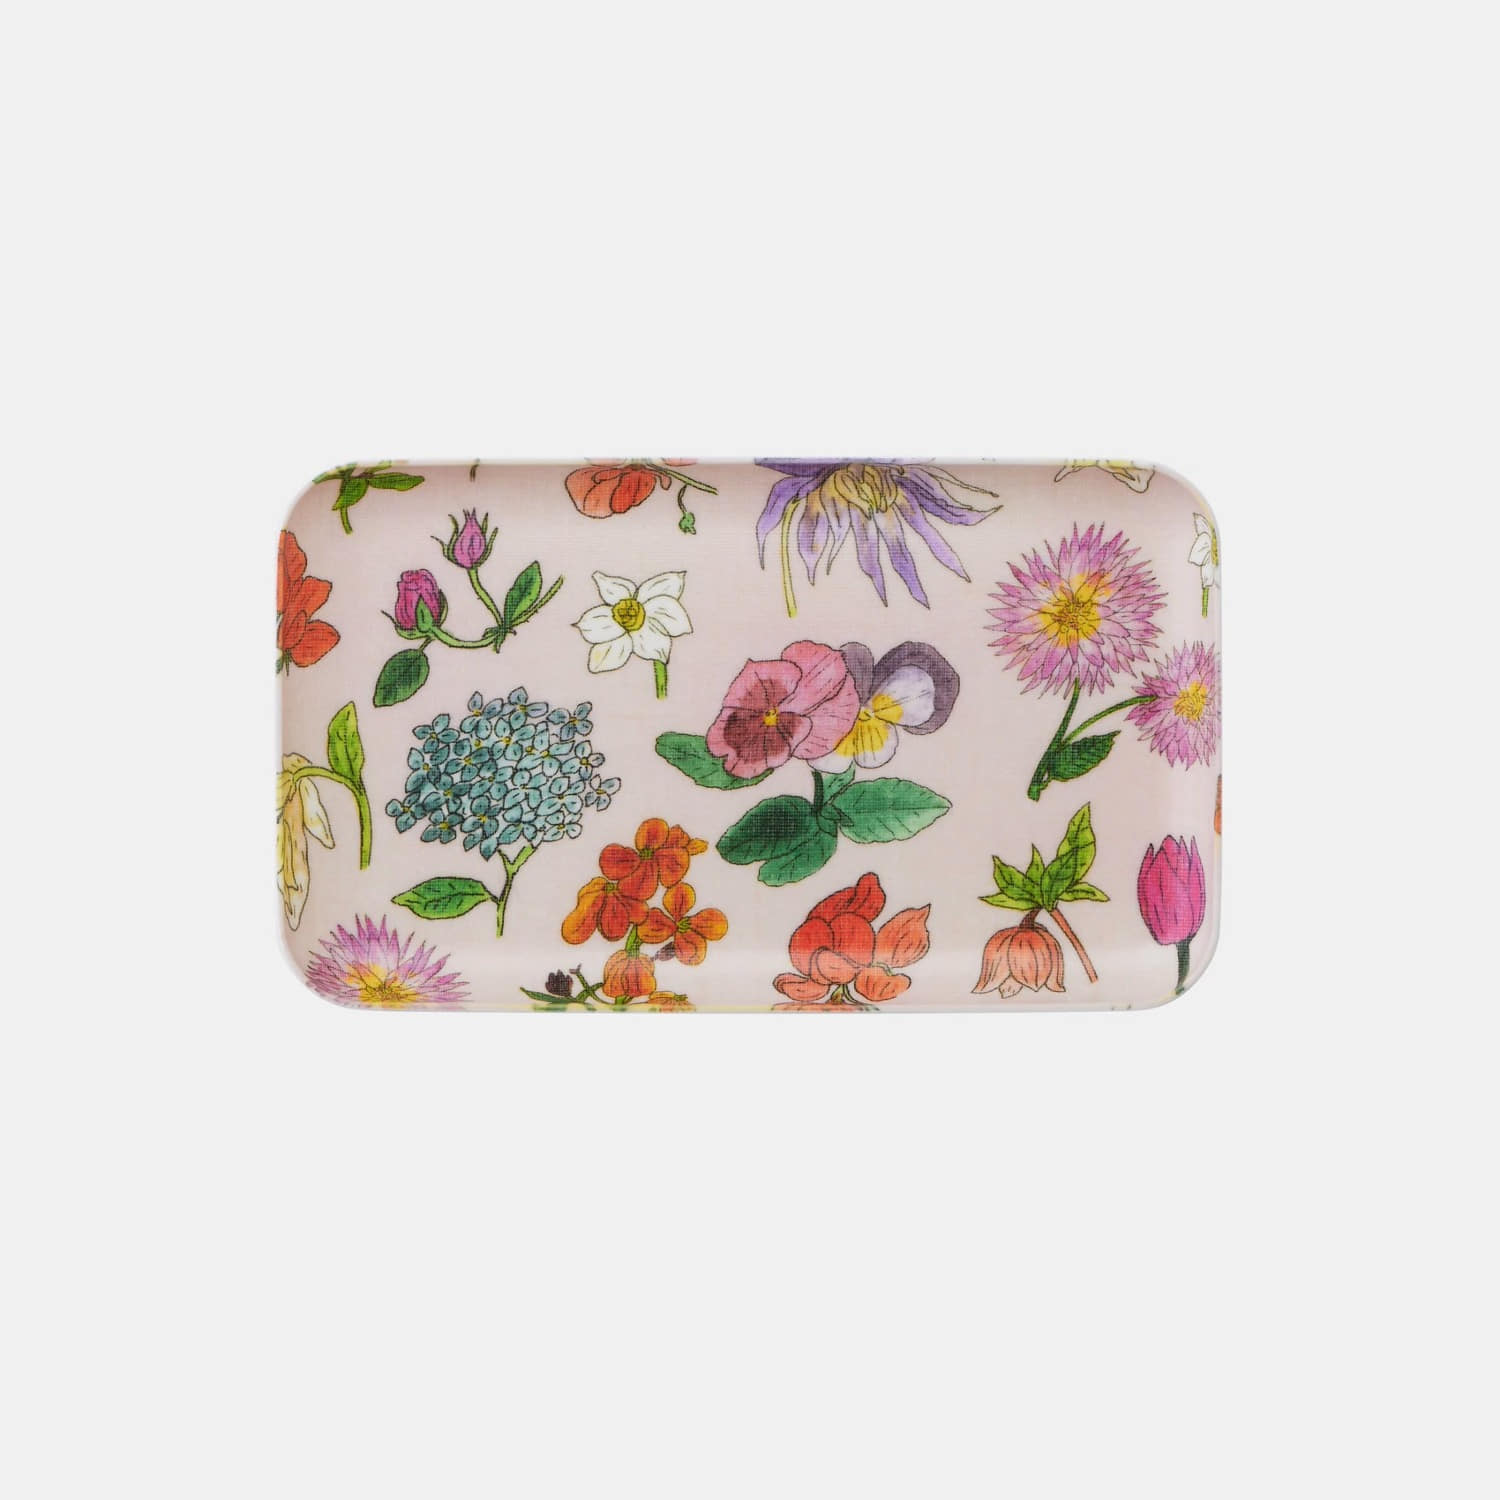 ﻿﻿Linen Coated Tray Small - Fleur